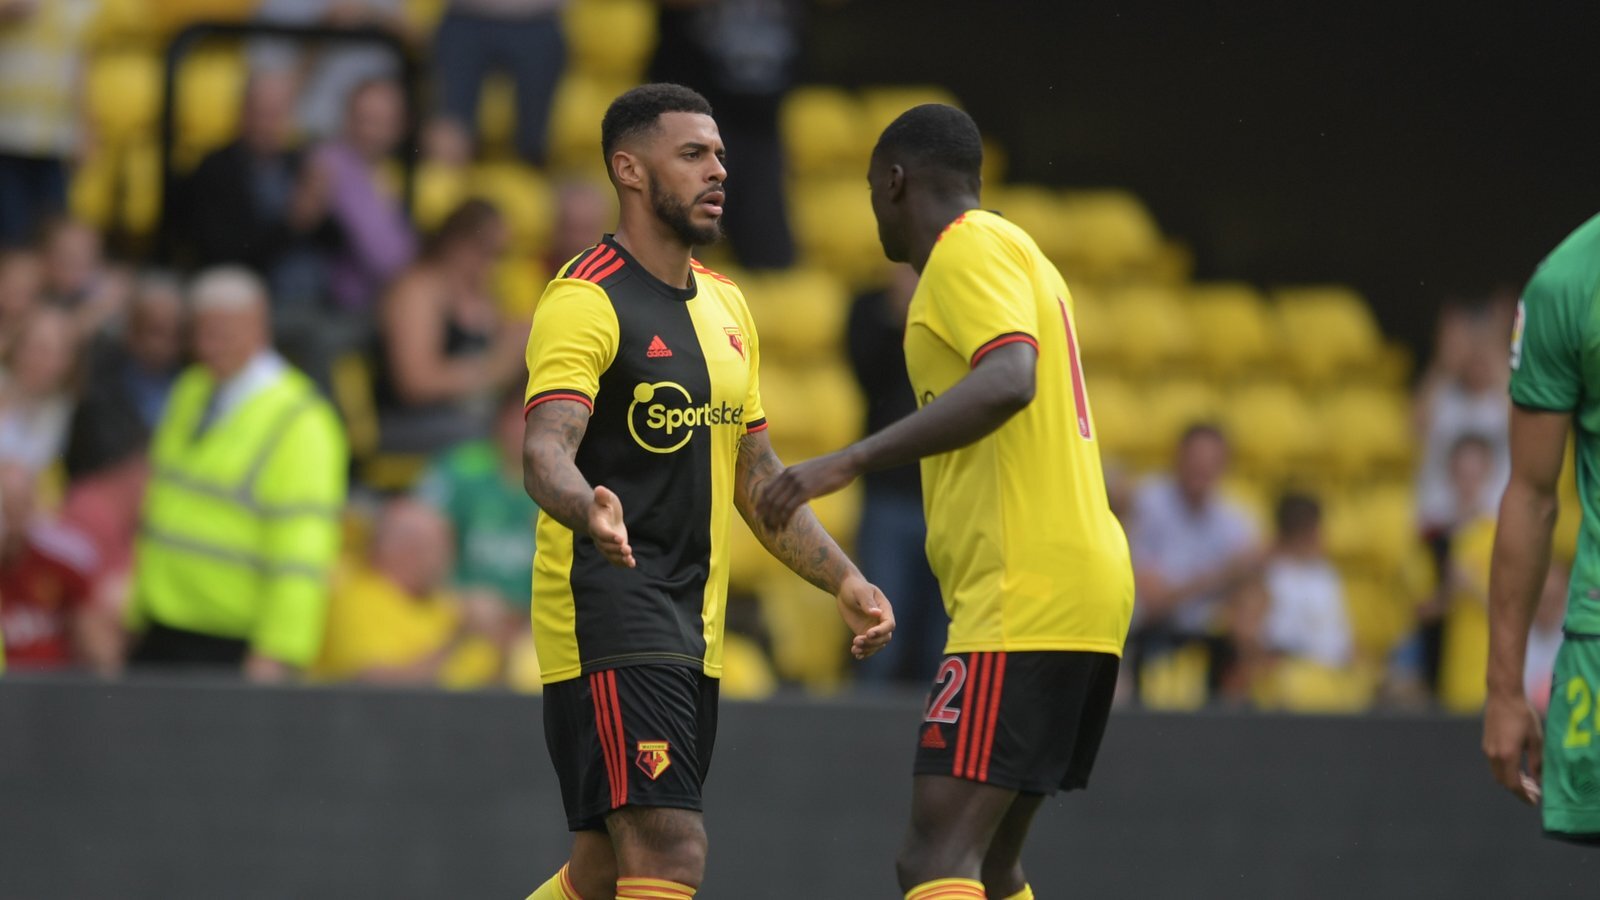 Watford Indebted to Welback for Their 2-1 Advantage over Norwich